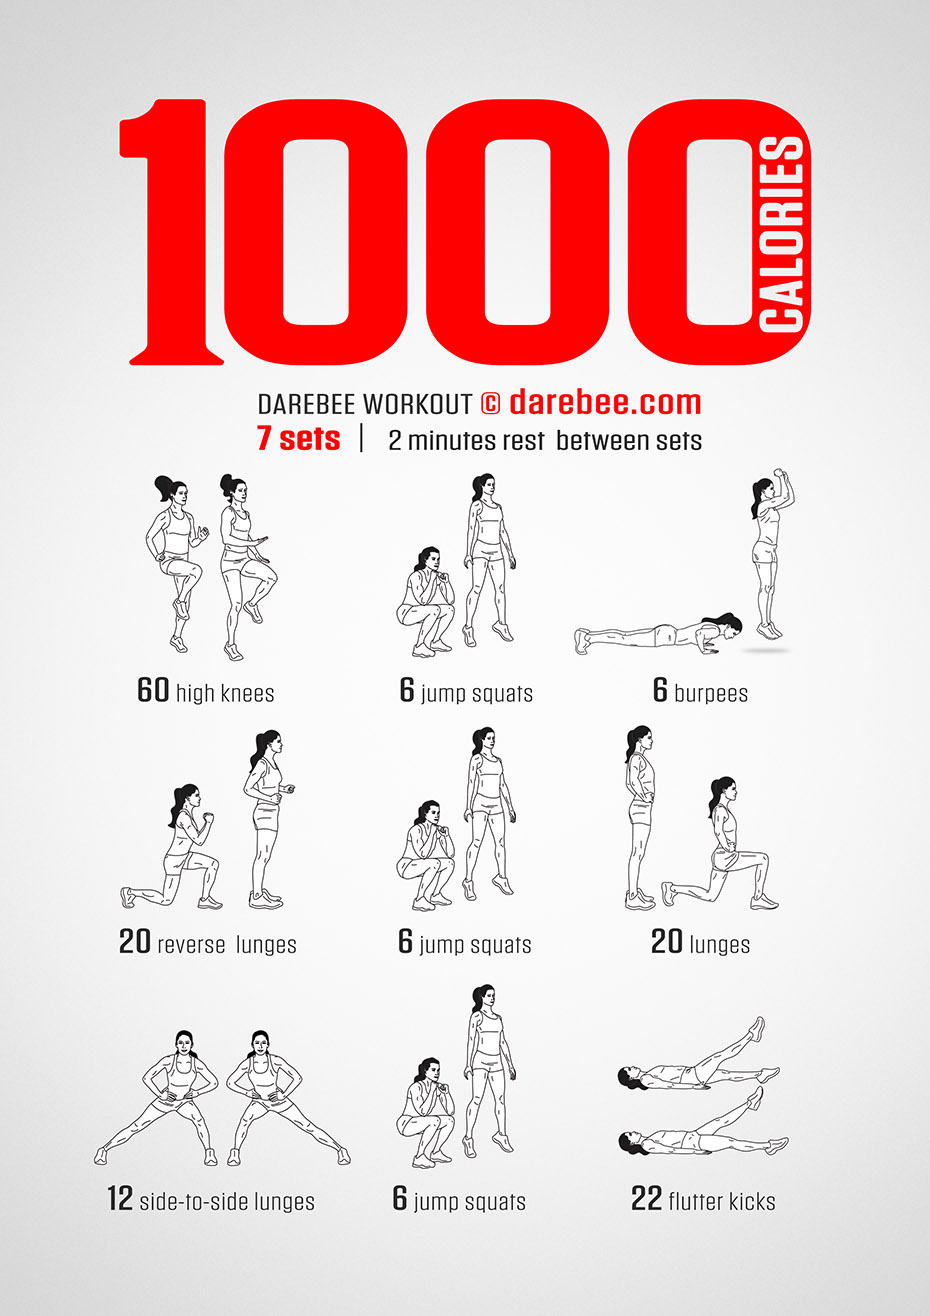 1000 Calories Workout is a DAREBEE home fitness no-equipment high-burn high-intensity workout that helps you burn 1,000 calories in a single workout.